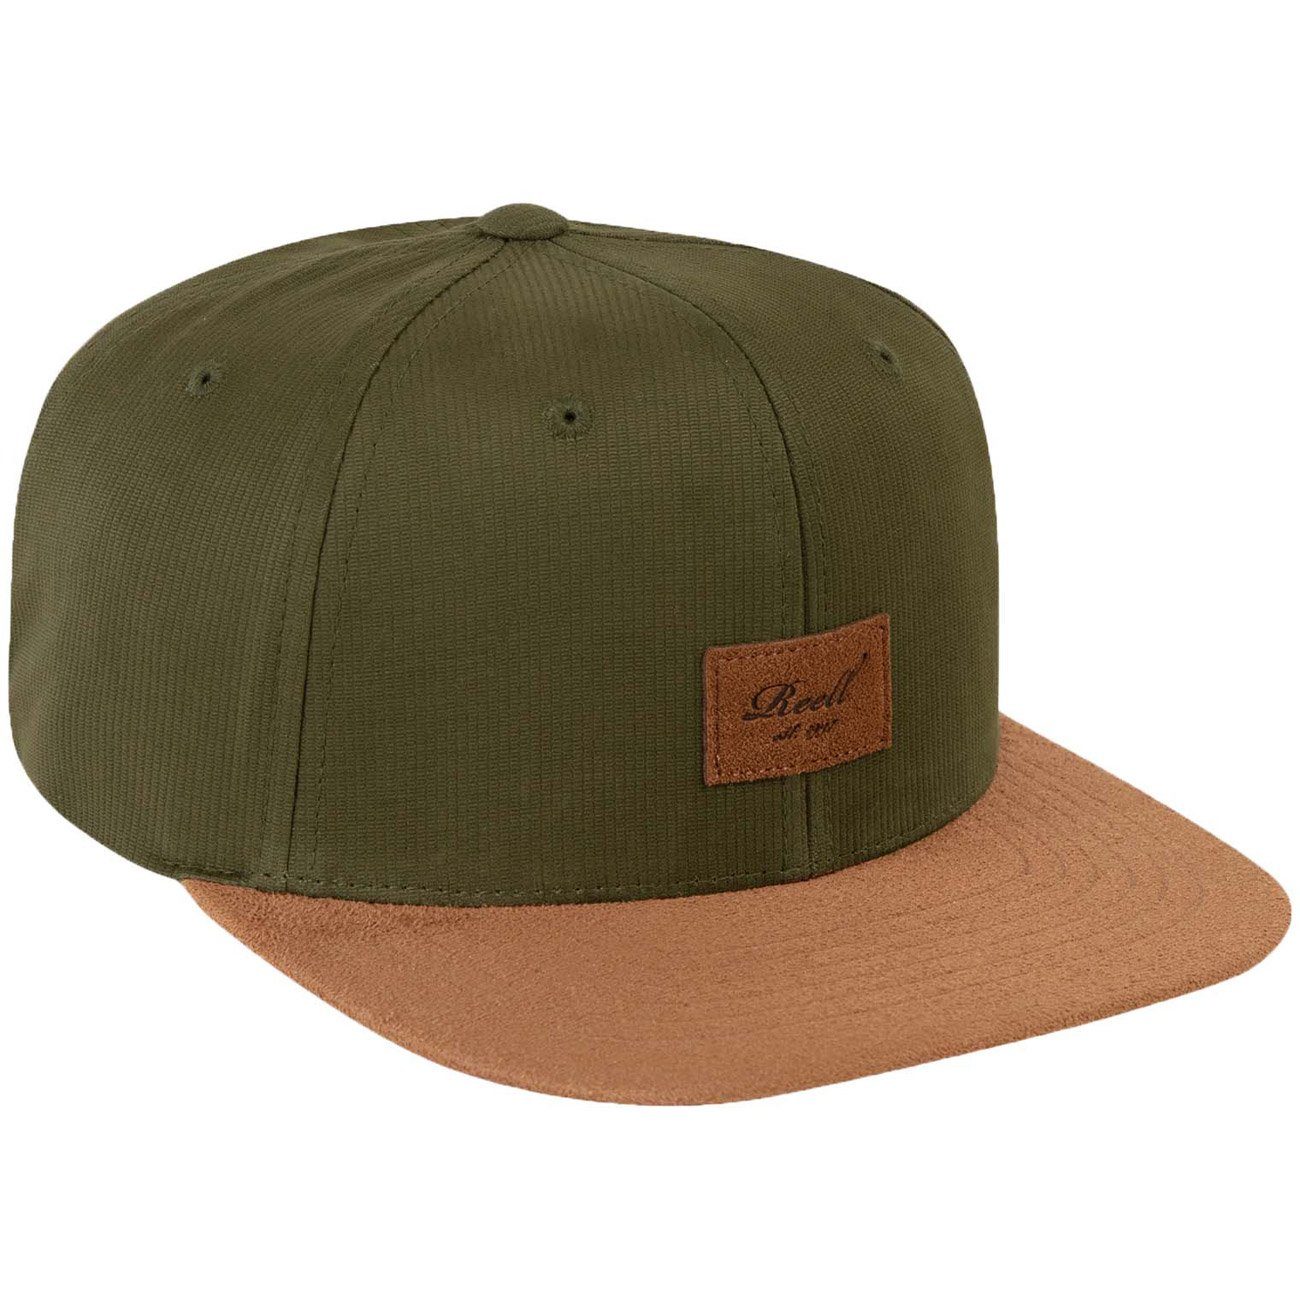 REELL Baseball Cap Suede Cap 161 bedford olive